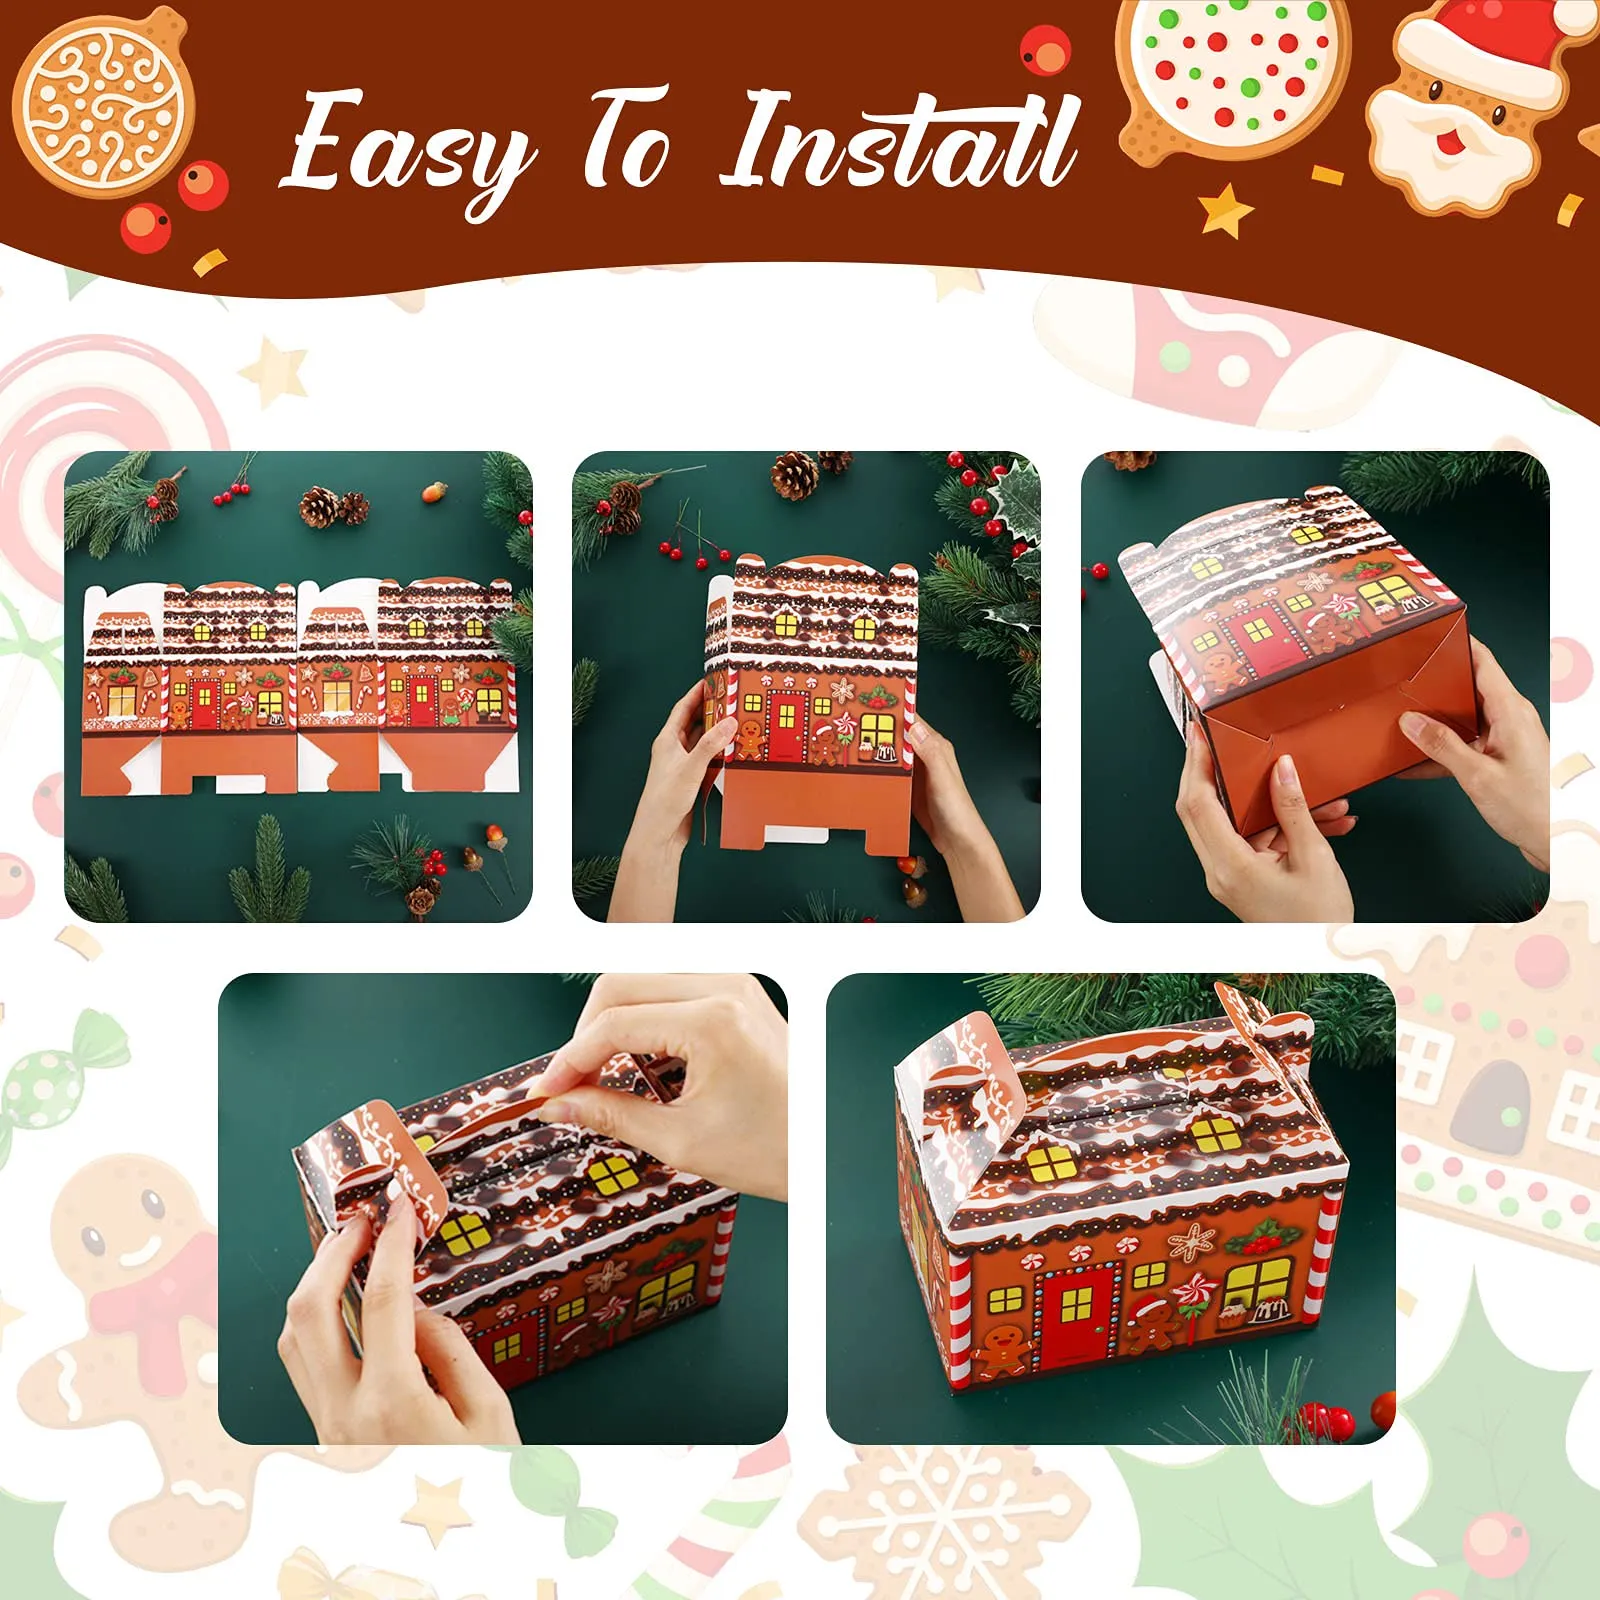 christmas treat boxes plaid santa elf snowman elk gingerbread xmas cardboard present candy cookie boxes with handles holiday party favor supplies 4 designs vivid style